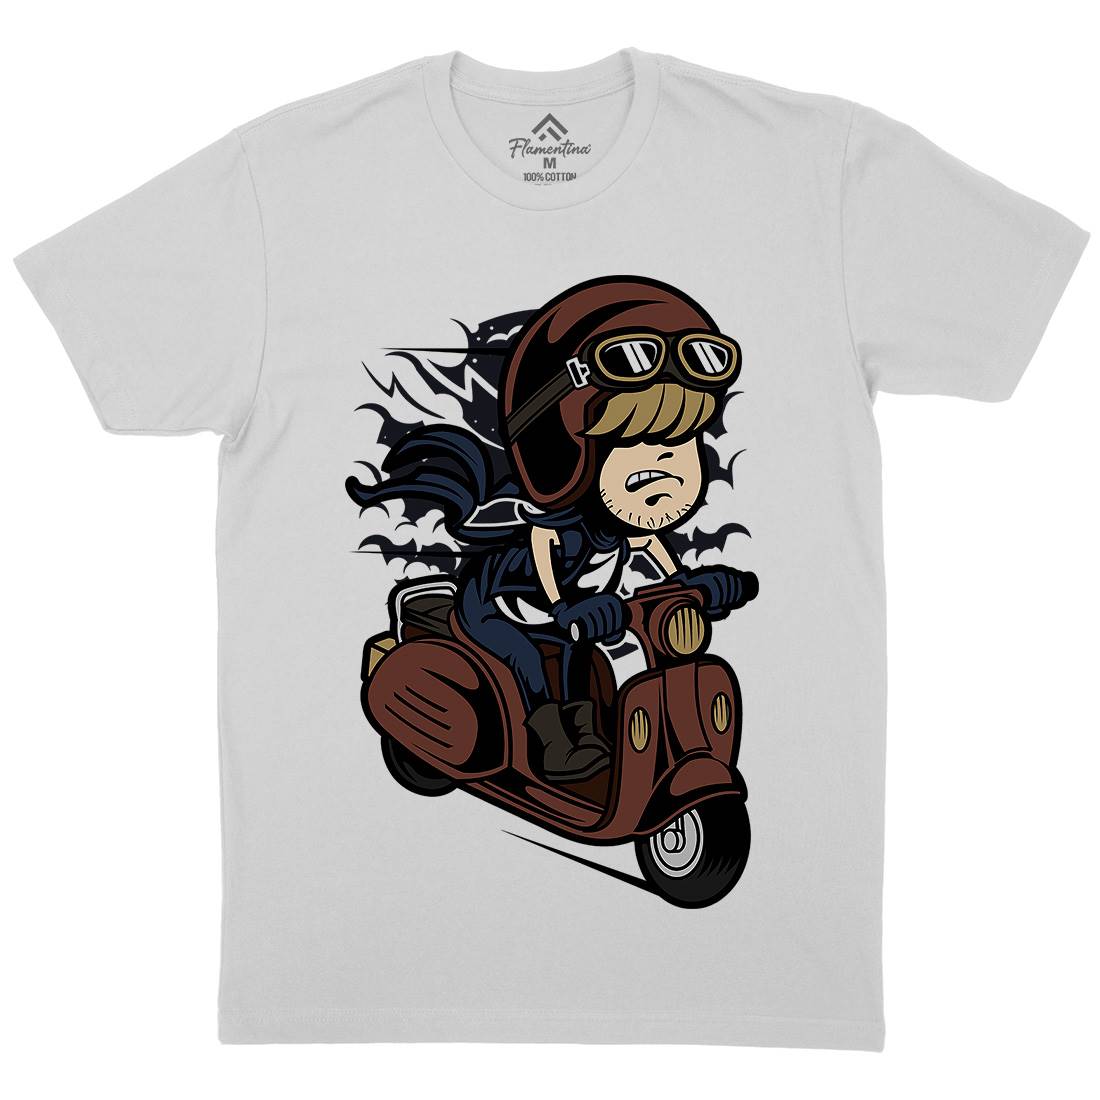 Scooter Rider Kid Mens Crew Neck T-Shirt Motorcycles C436